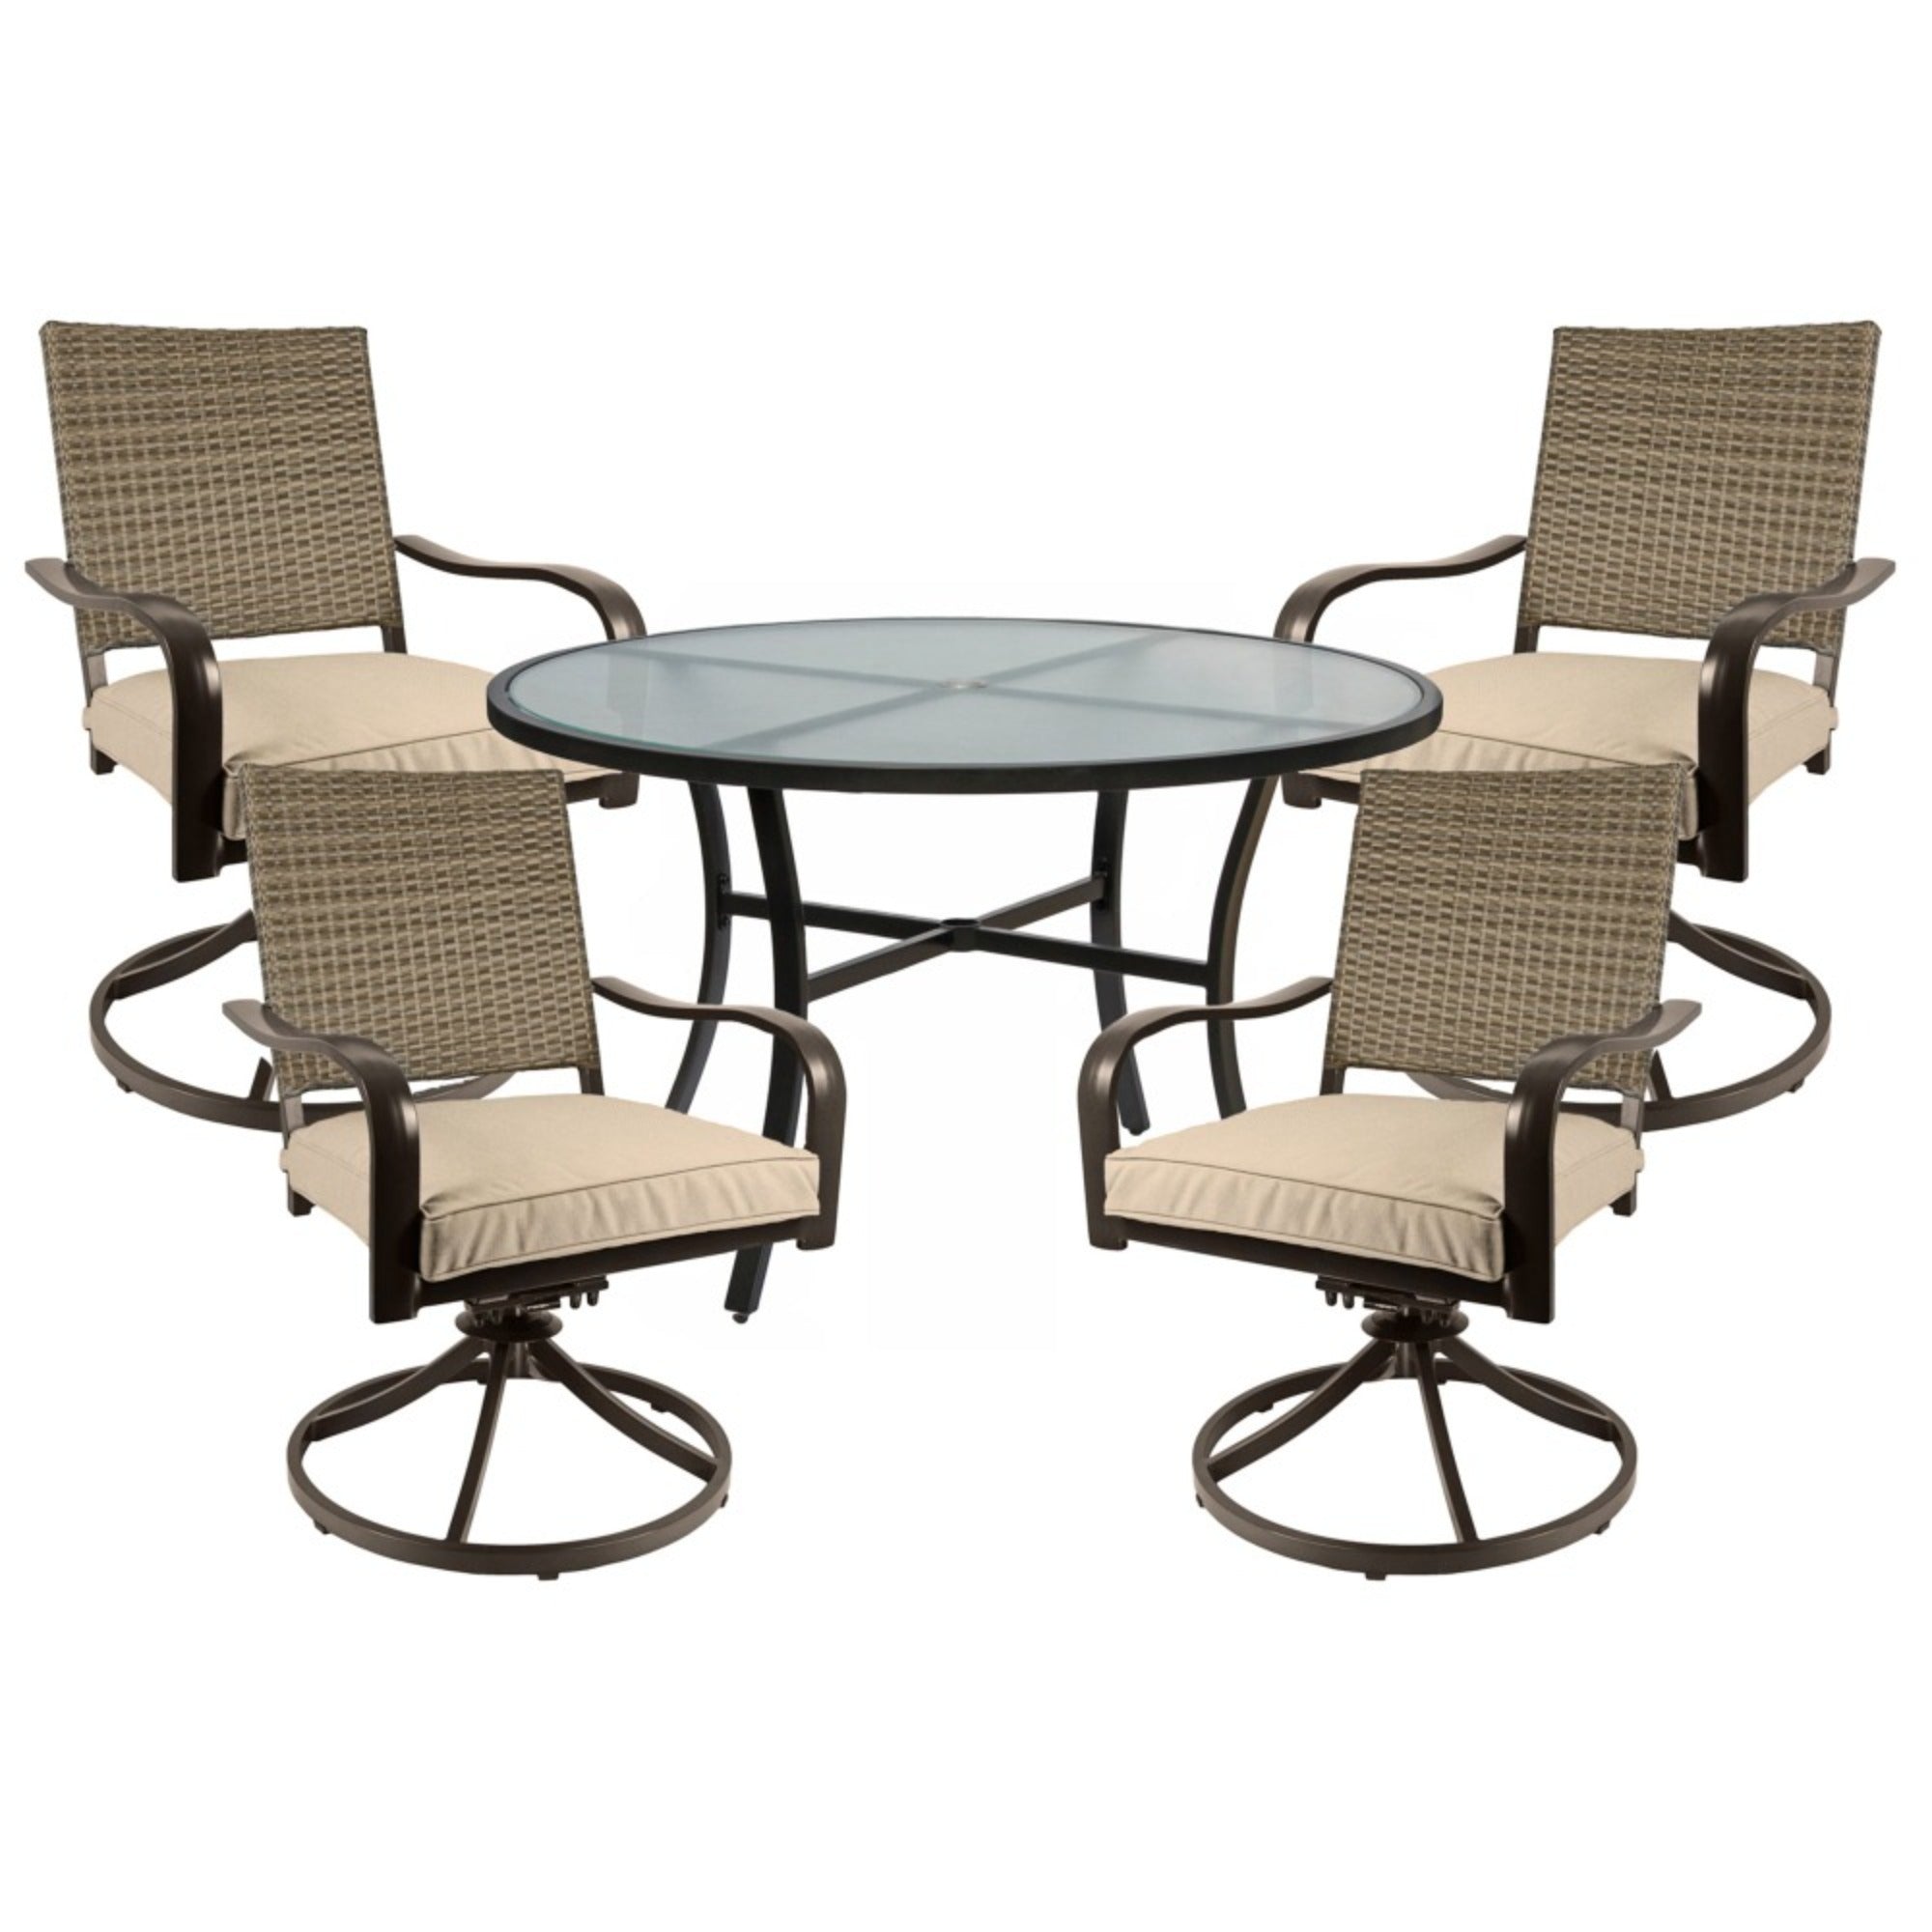 Garden Elements Outdoor Aluminum Bellevue Dining Patio Set, 4 Chairs and Table, Brown, 40"